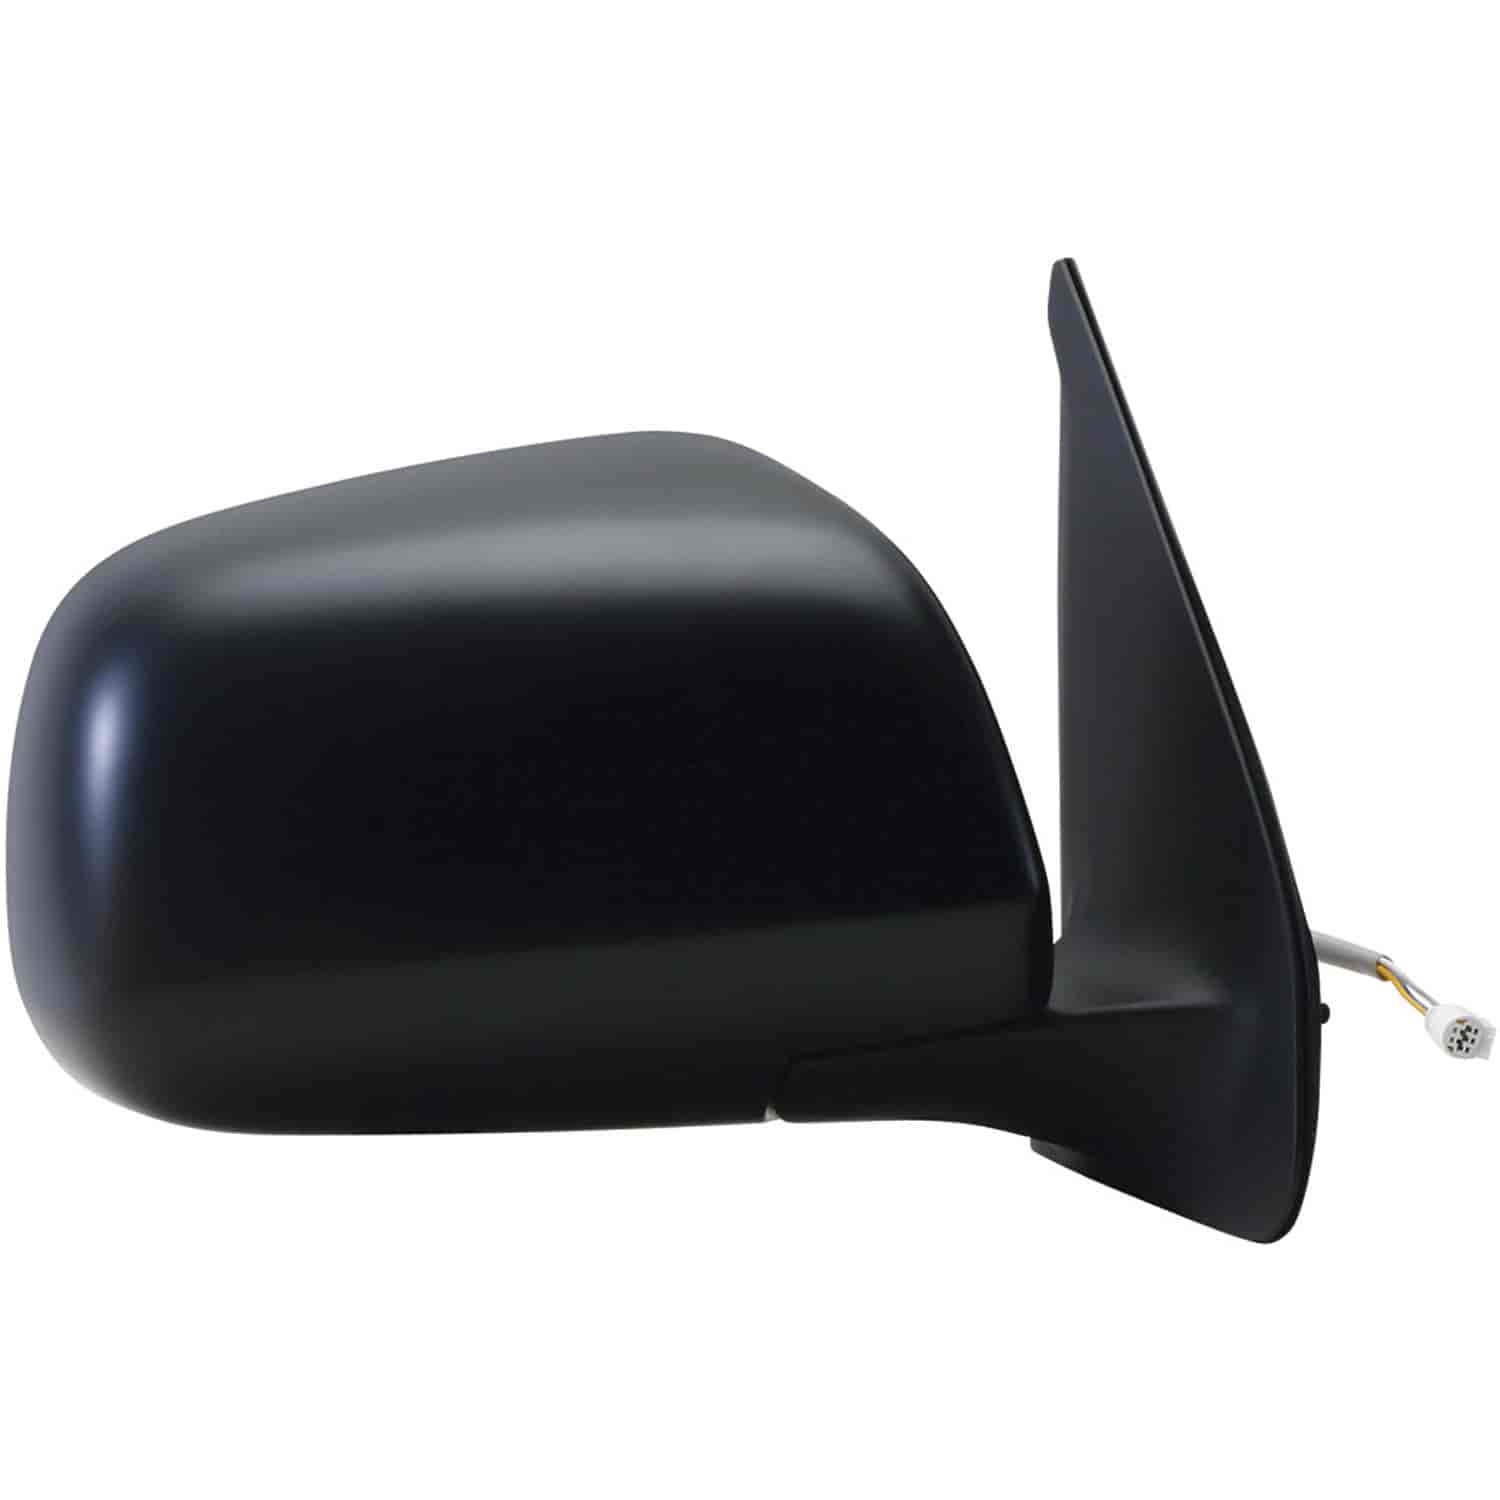 OEM Style Replacement mirror for 05-14 Toyota Tacoma passenger side mirror tested to fit and functio